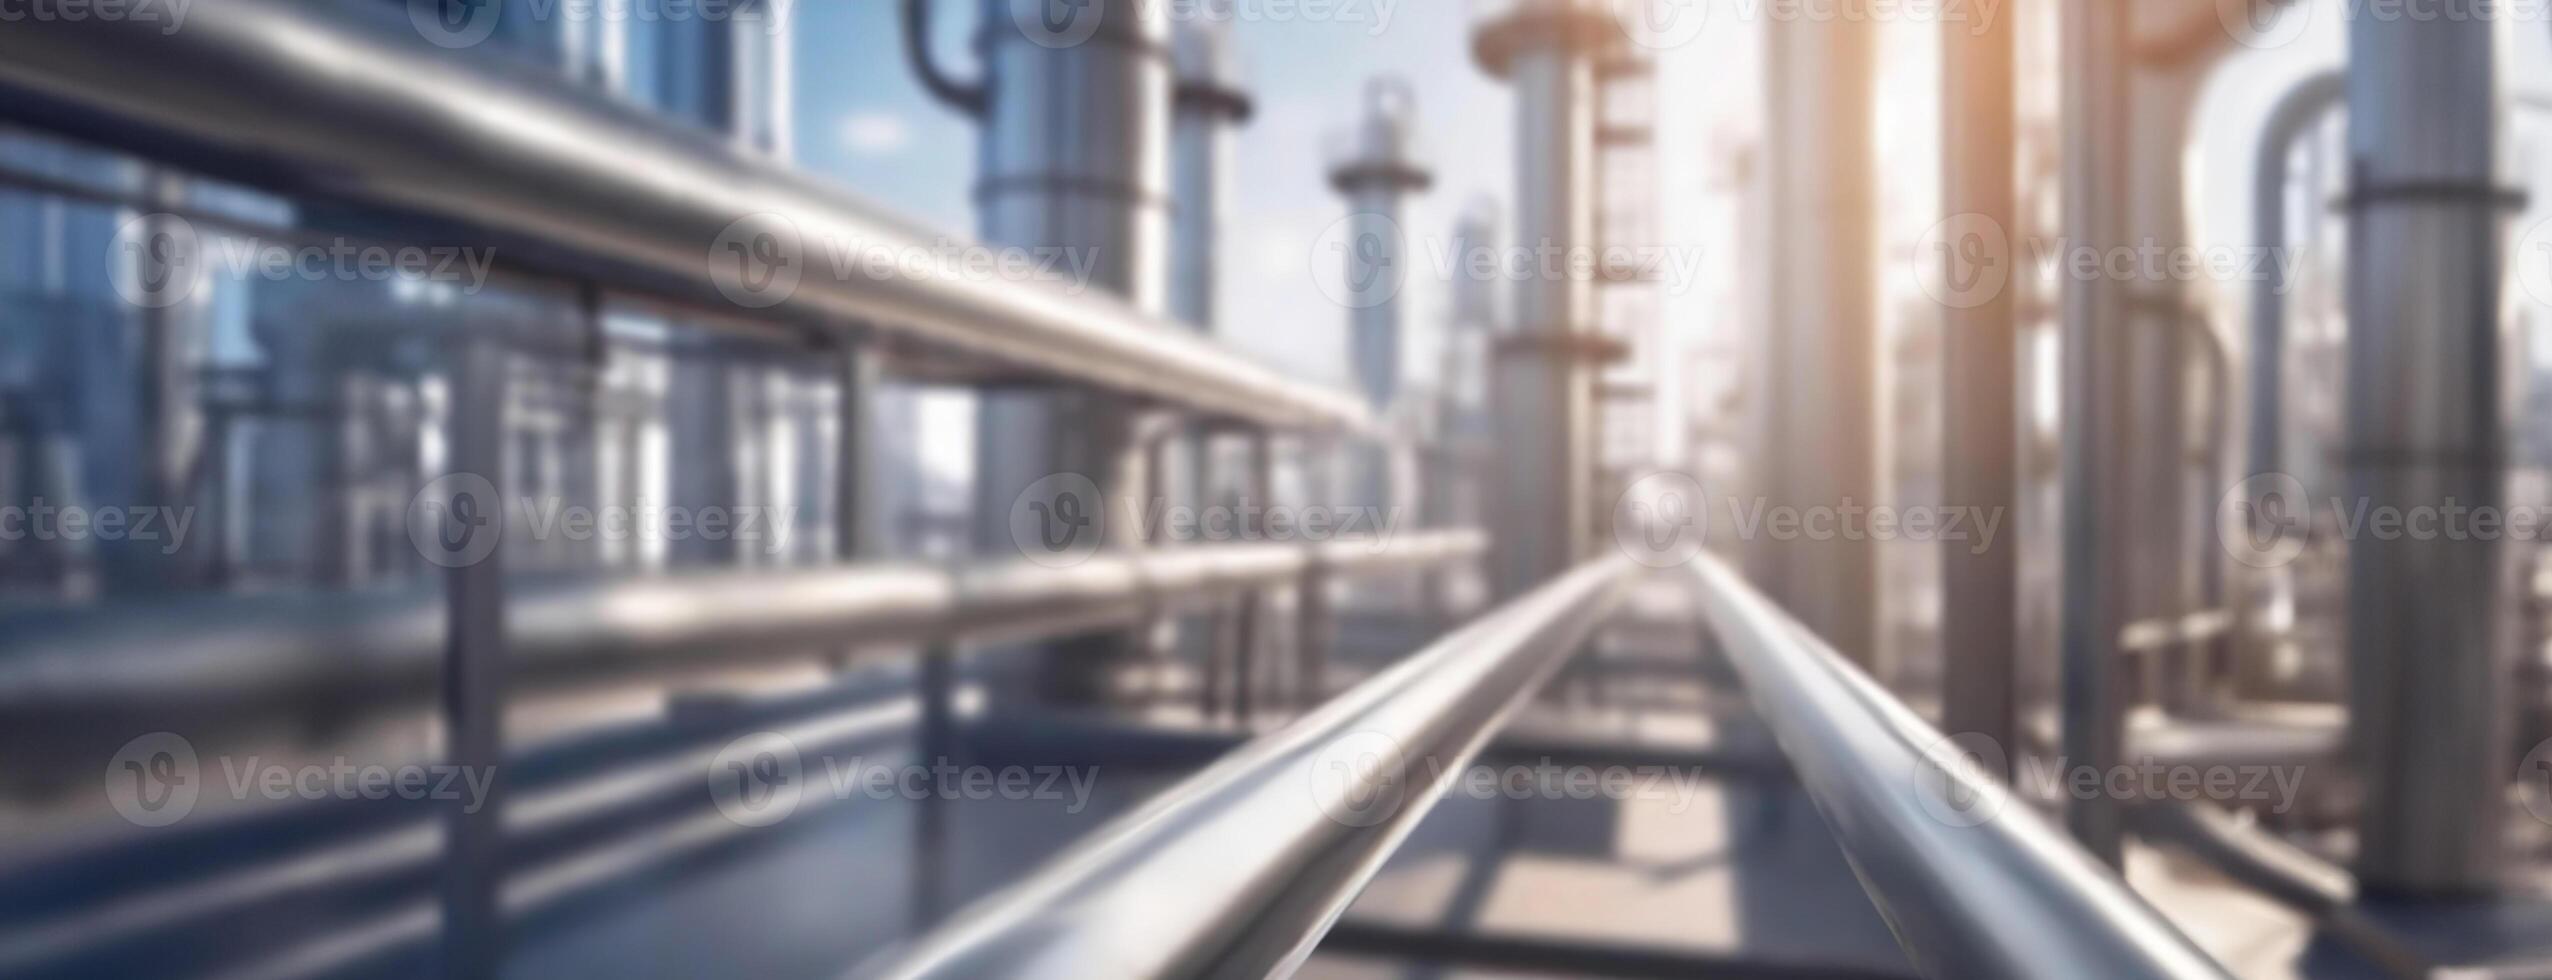 AI Generated Industrial Majesty. A Serene Glimpse into the Heart of Energy Production. Pipelines stretch towards towering distillation columns, a testament to the complex beauty of industrial photo